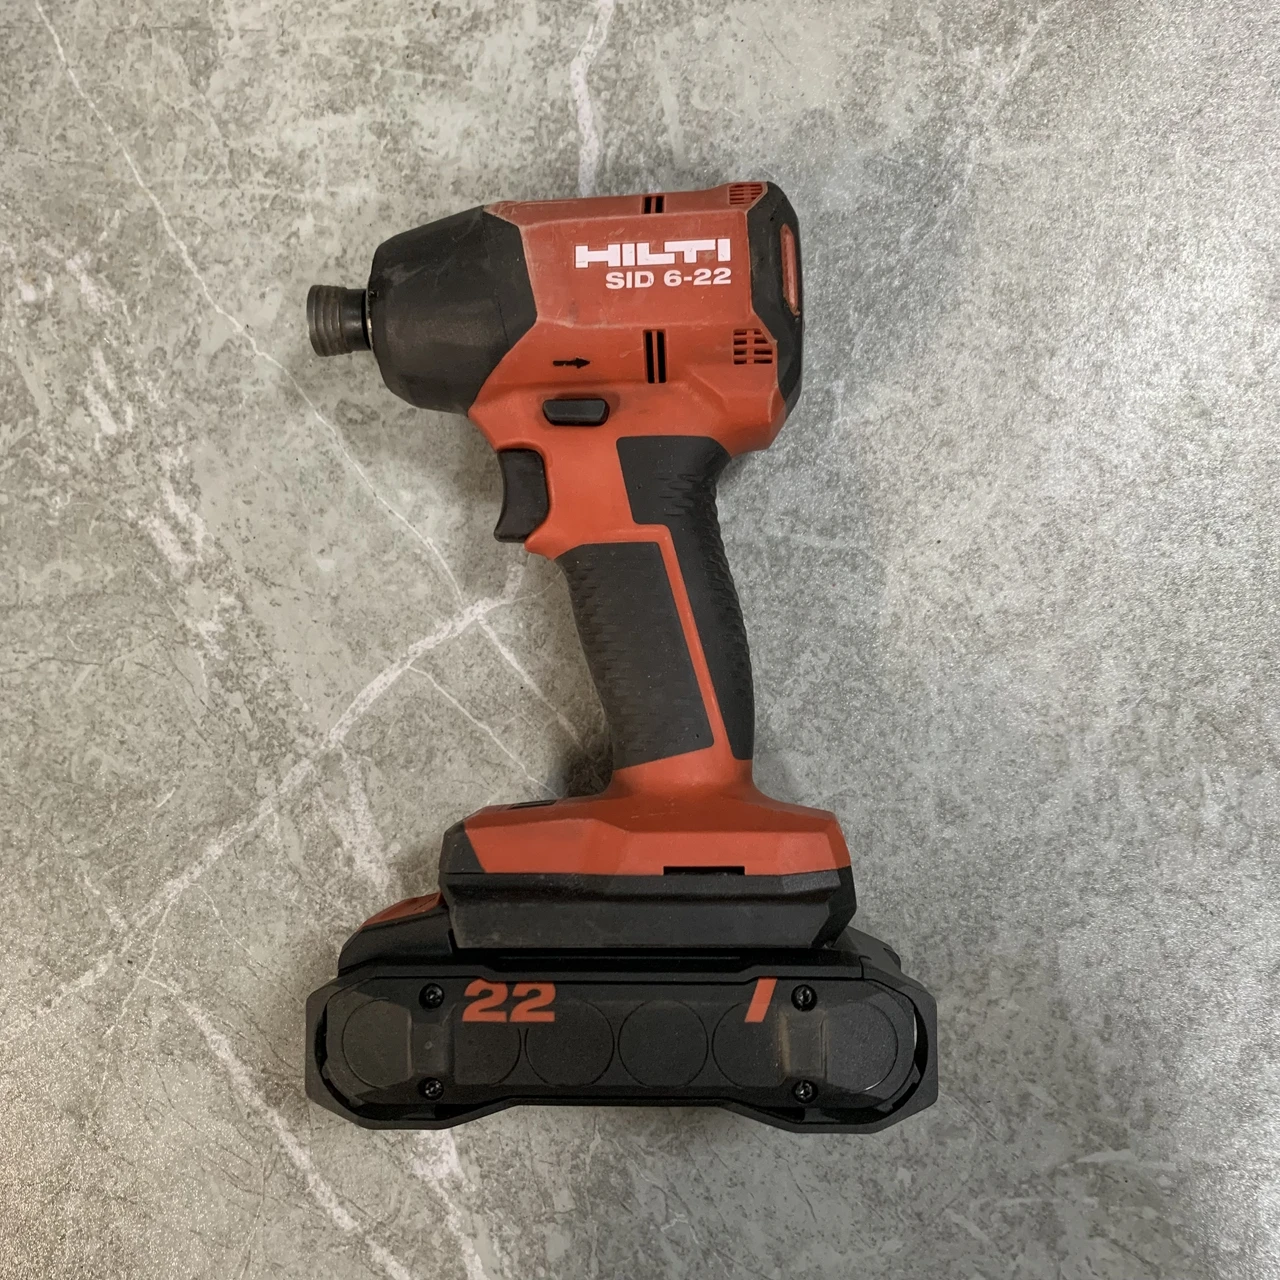 SID 6 HILTI NURON 22 Volt SID 6-22 Brushless & Cordless Impact Drill Driver Includes 4.0AH battery  second-hand патрон hilti sfe 2 a12 drill driver